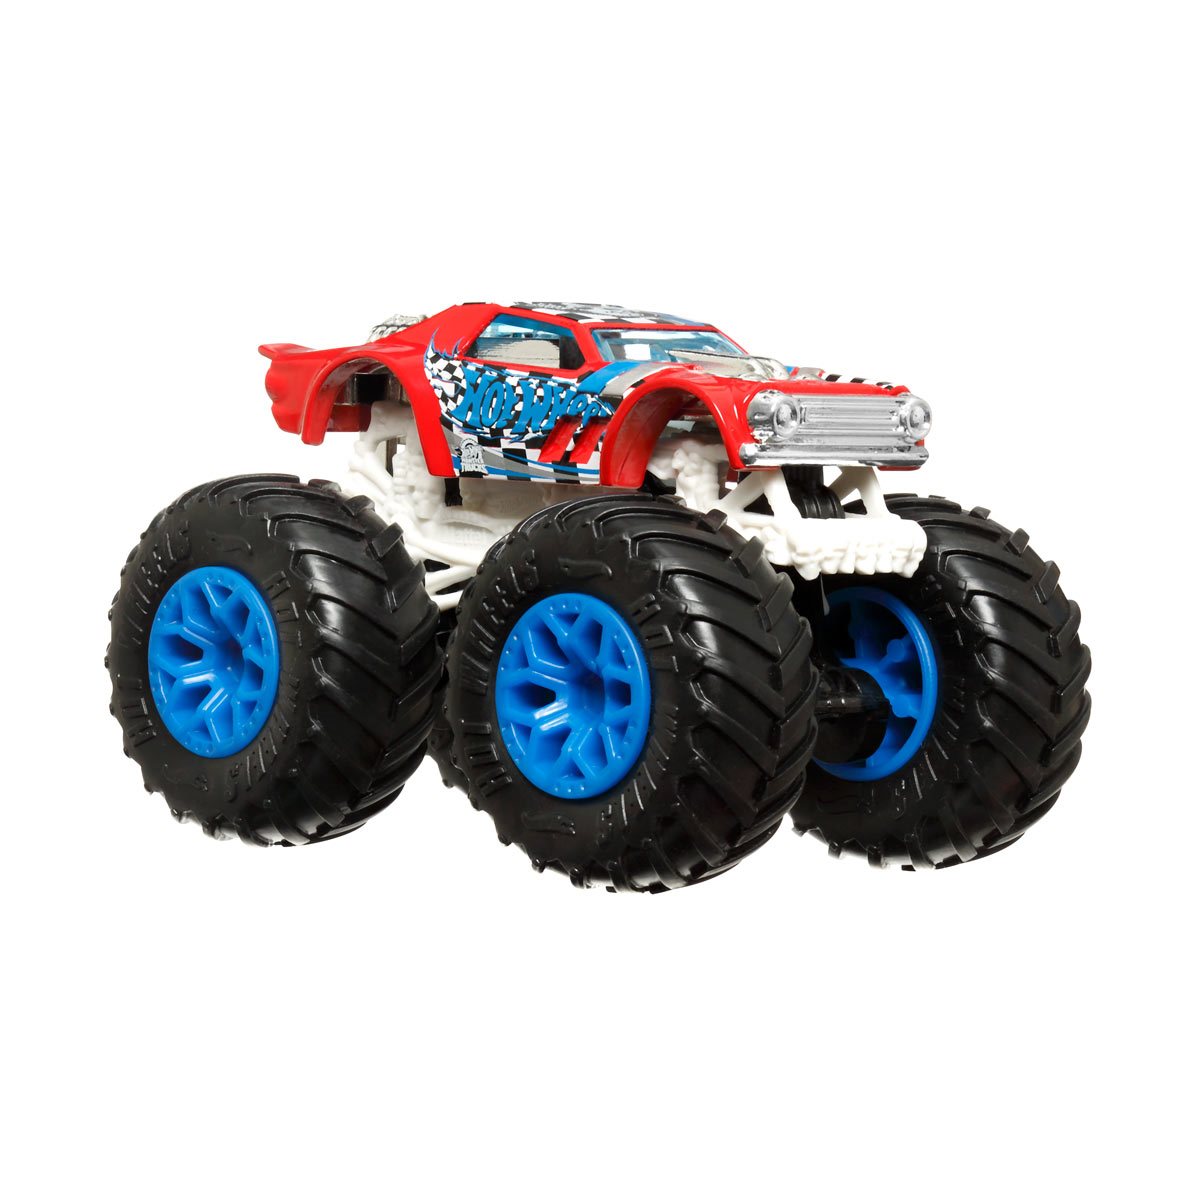 Hot Wheels Monster Trucks 1:64 Scale Mix 7 (G) Case of 8 Vehicles